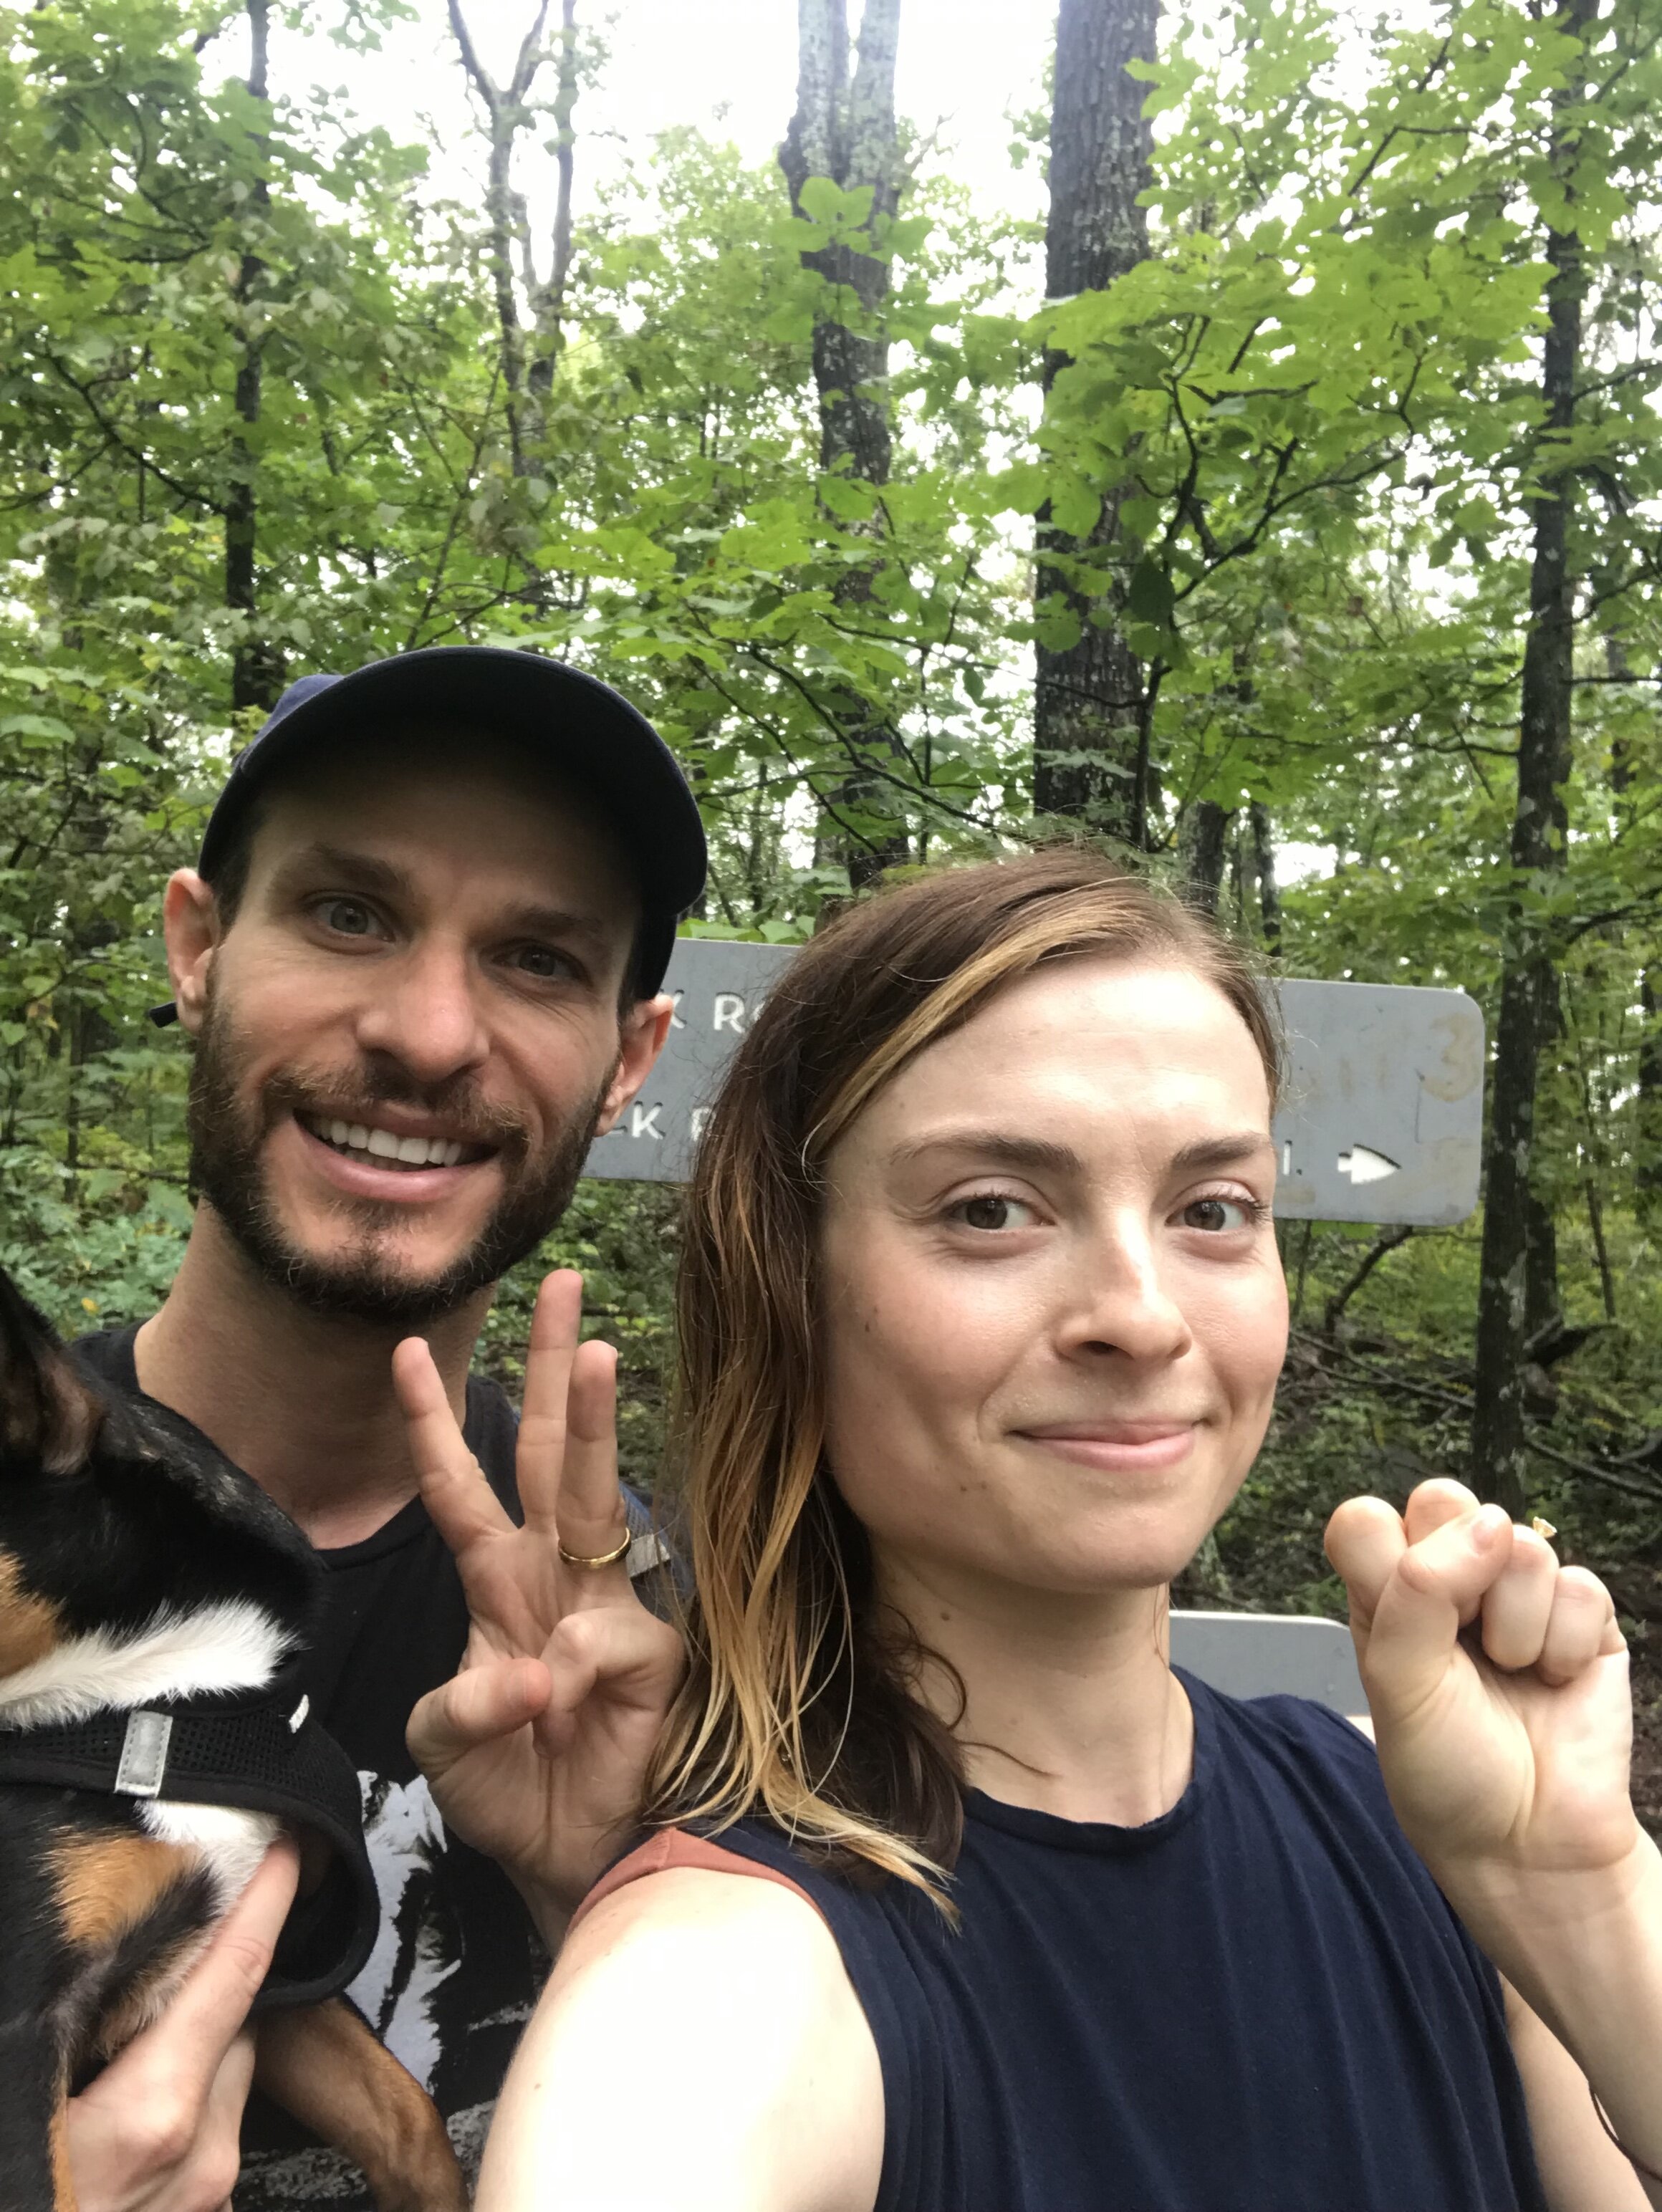 Photo of the author hiking with her husband. There are green trees and a trail sign behind them.